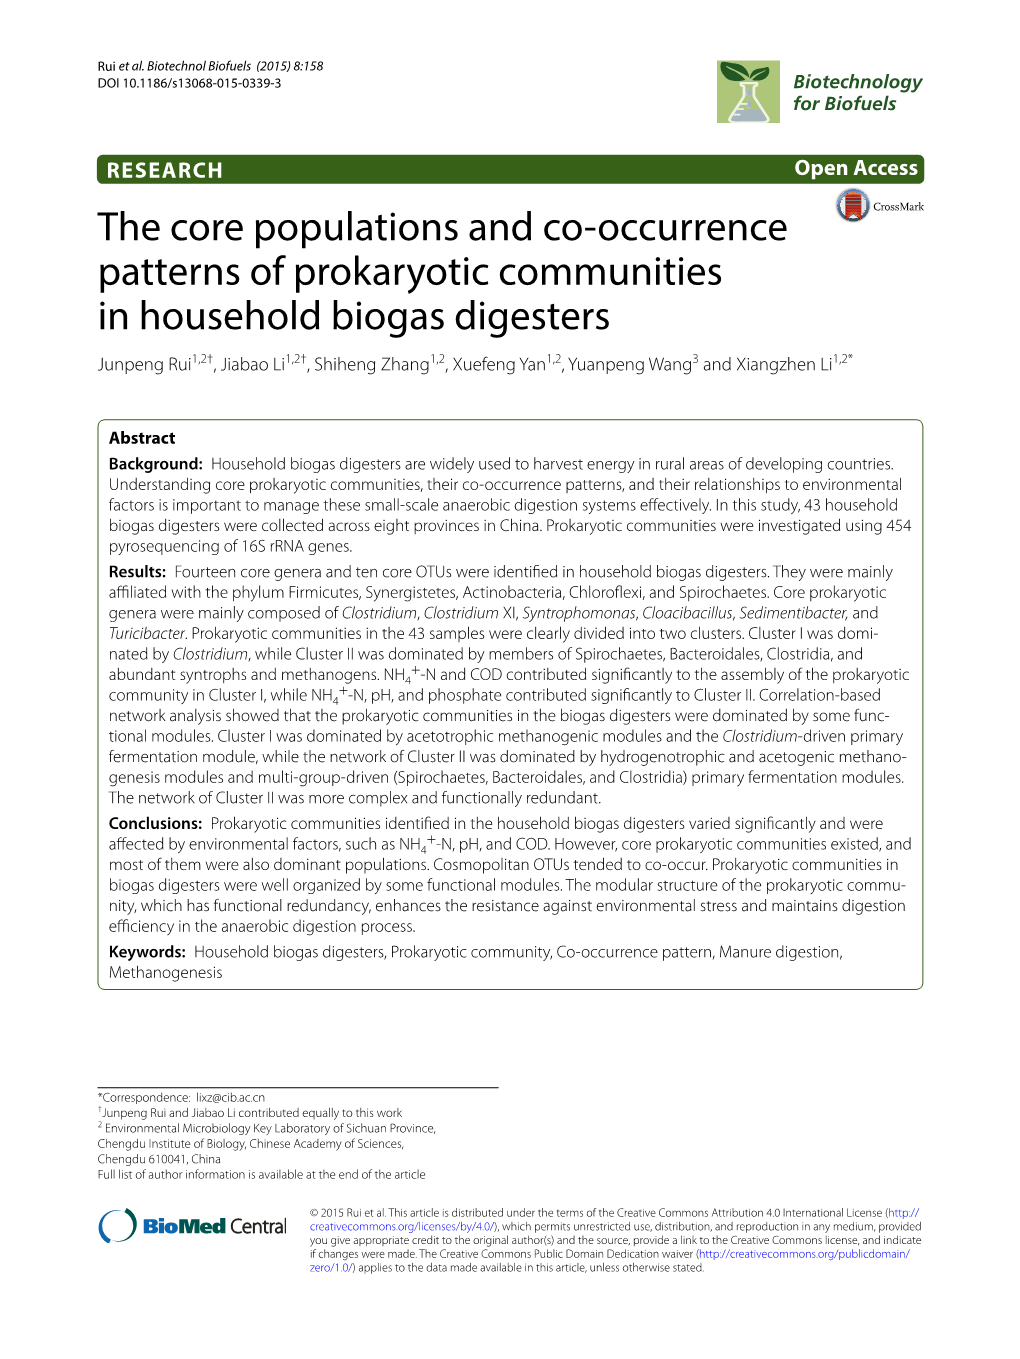 The Core Populations and Co-Occurrence Patterns Of